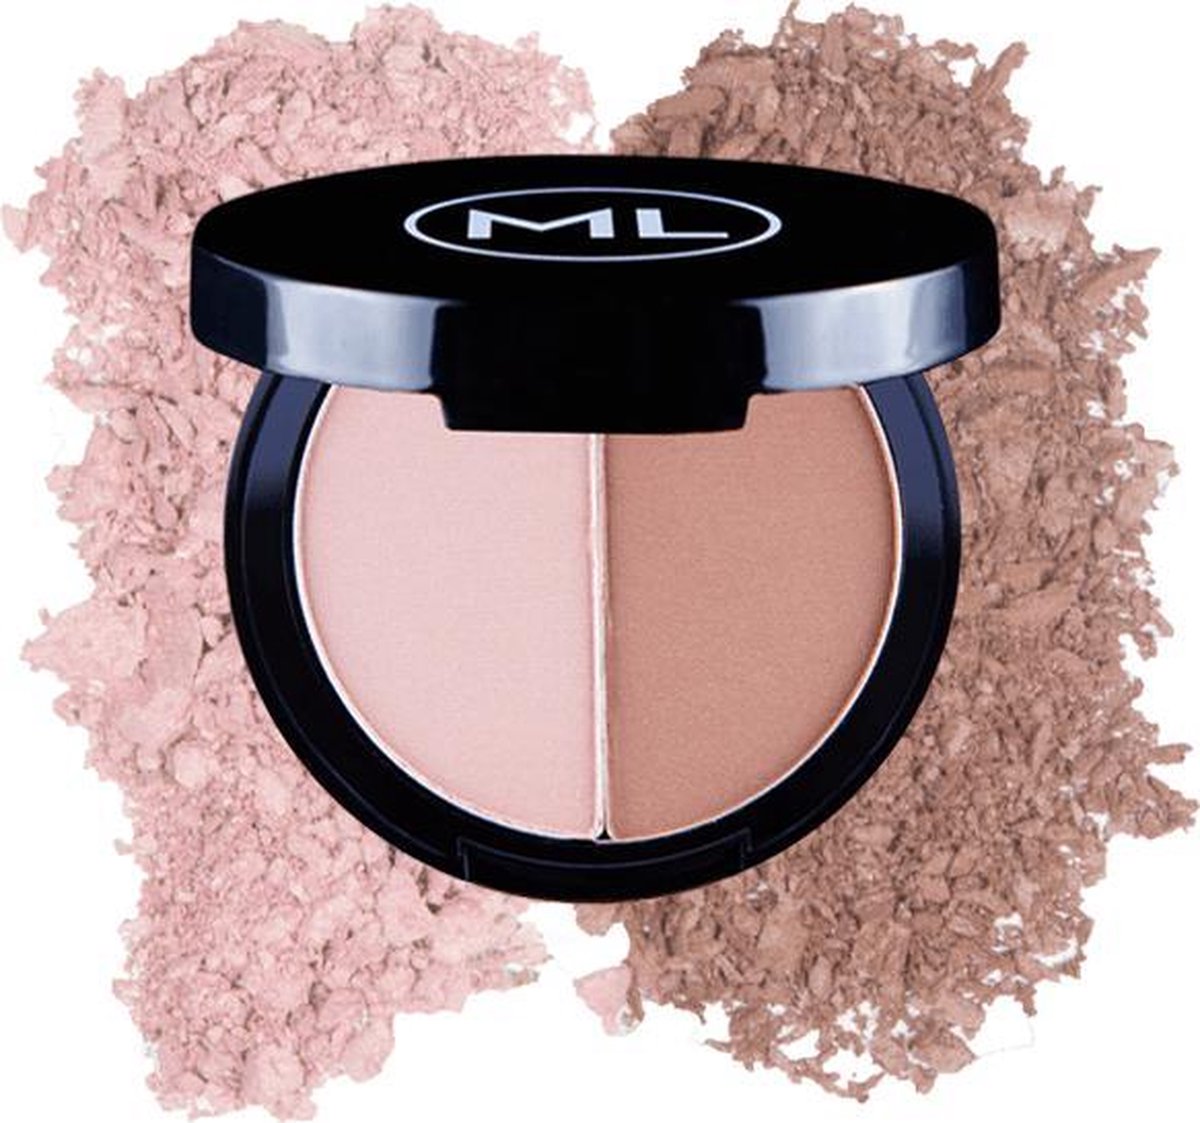 Model Launcher Contour Powder Duo - Afternoon Delight